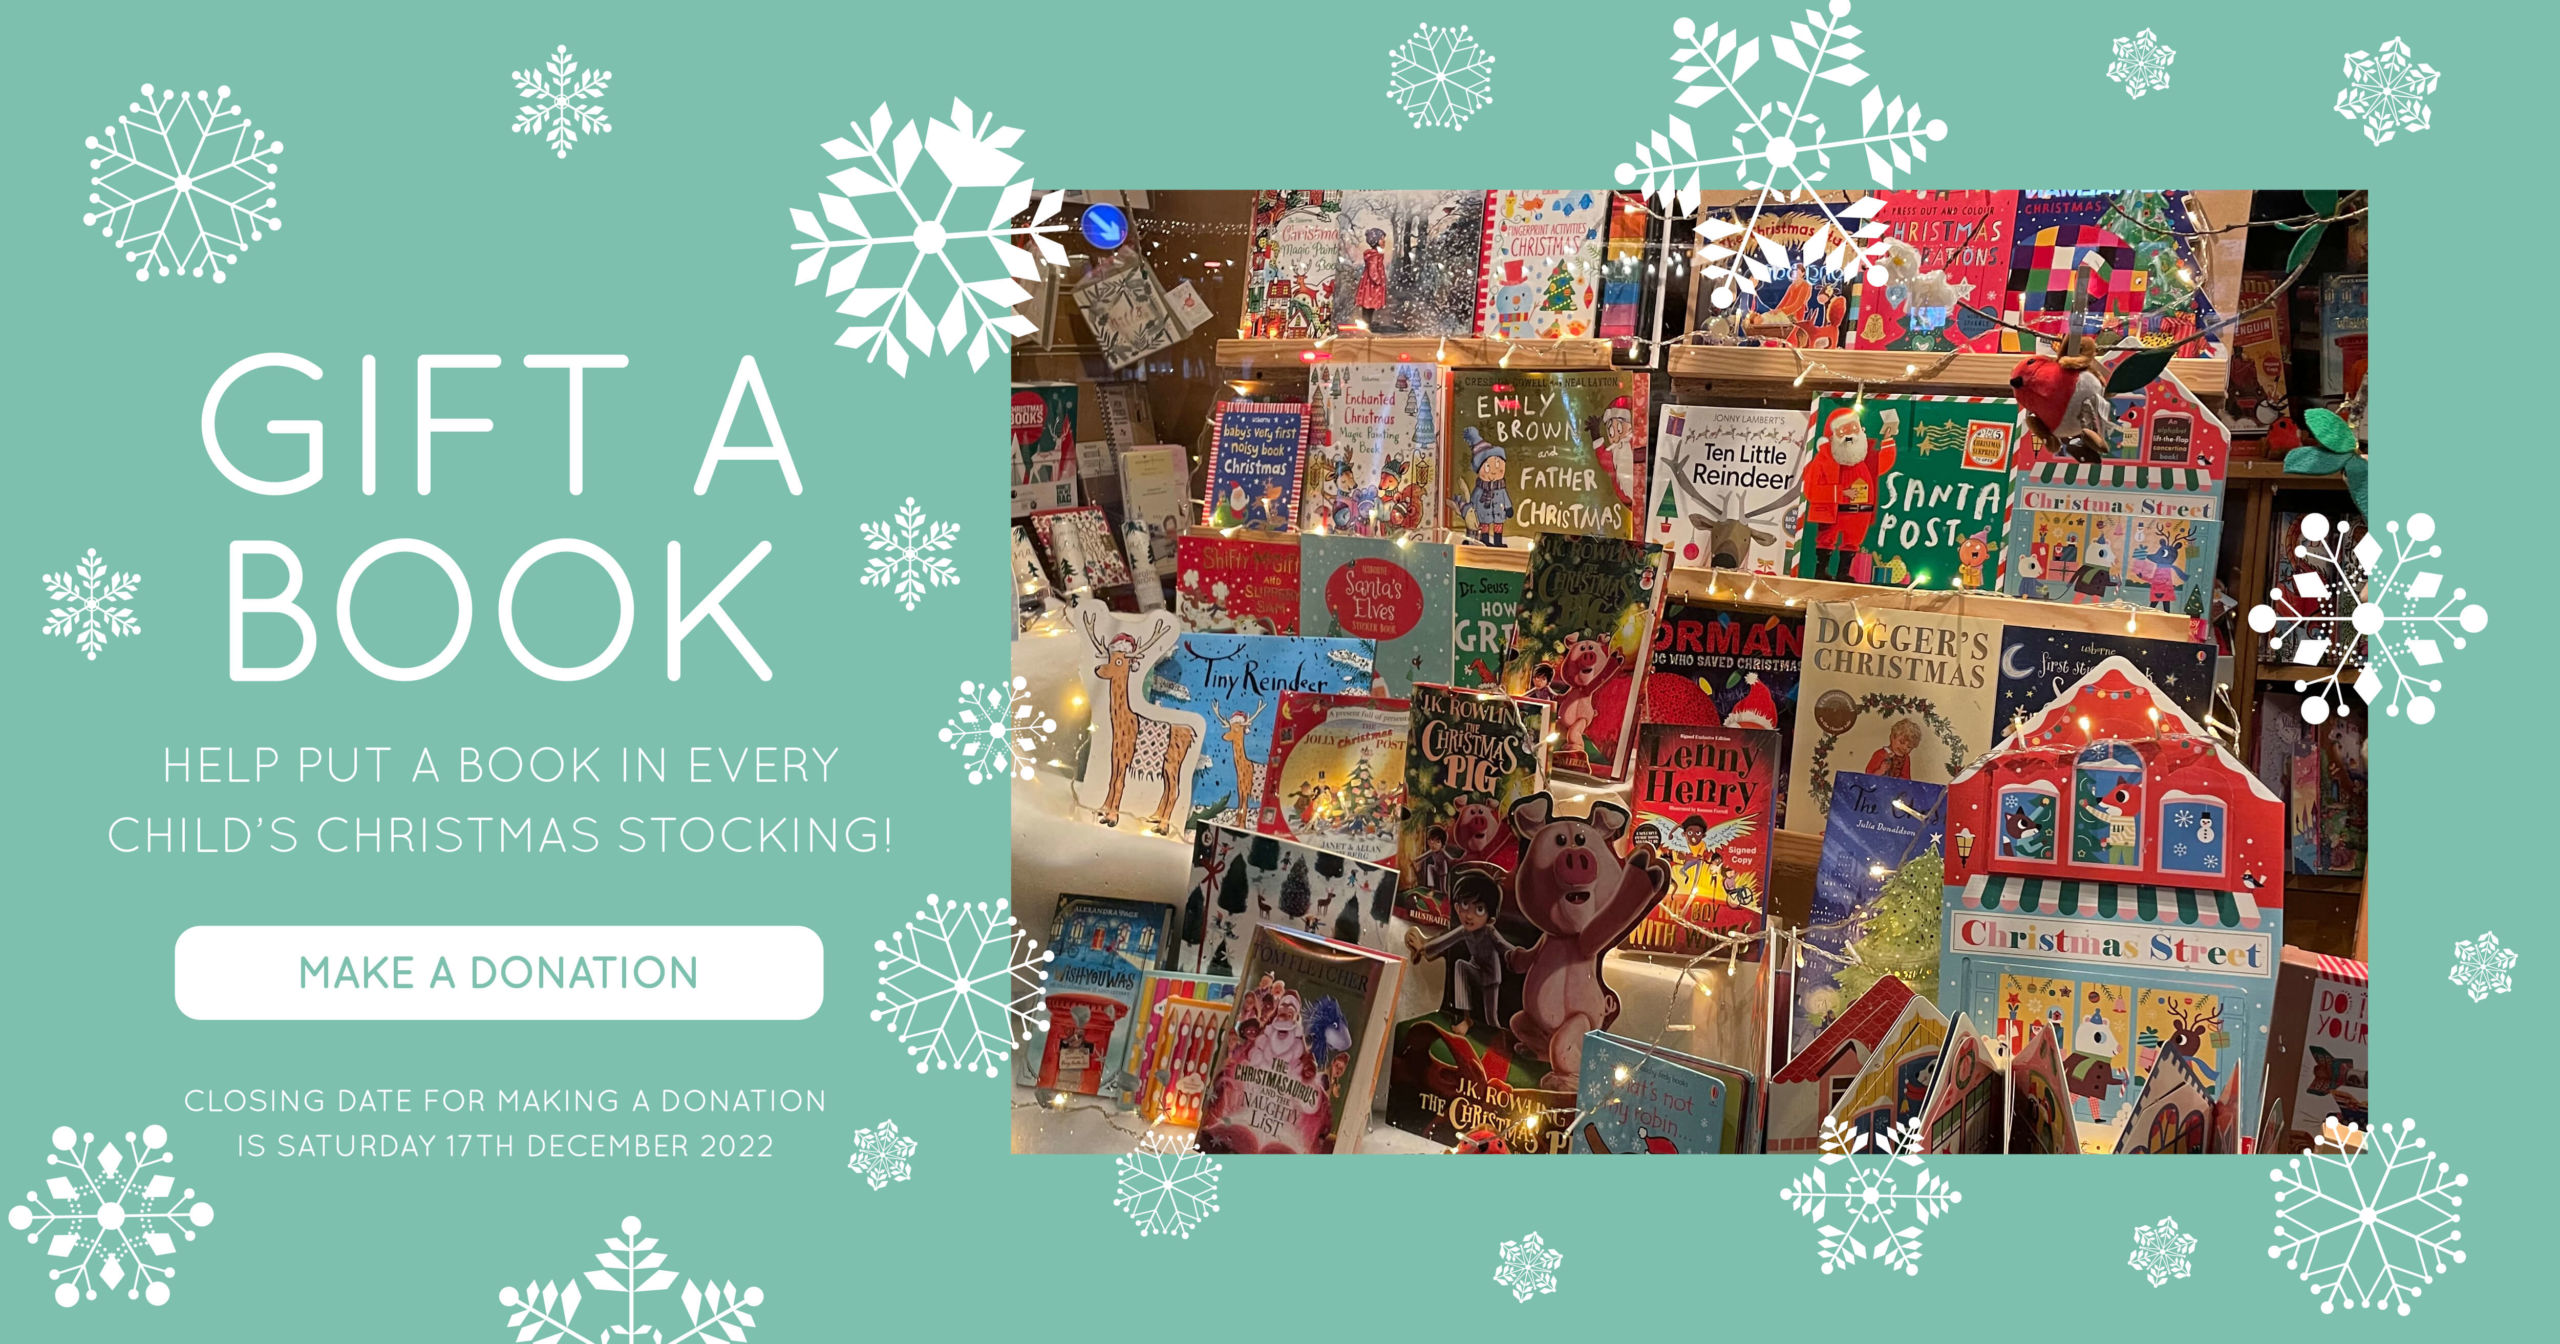 Graphic for Gift a Book with details of the event and an image of Christmas books in the shop window